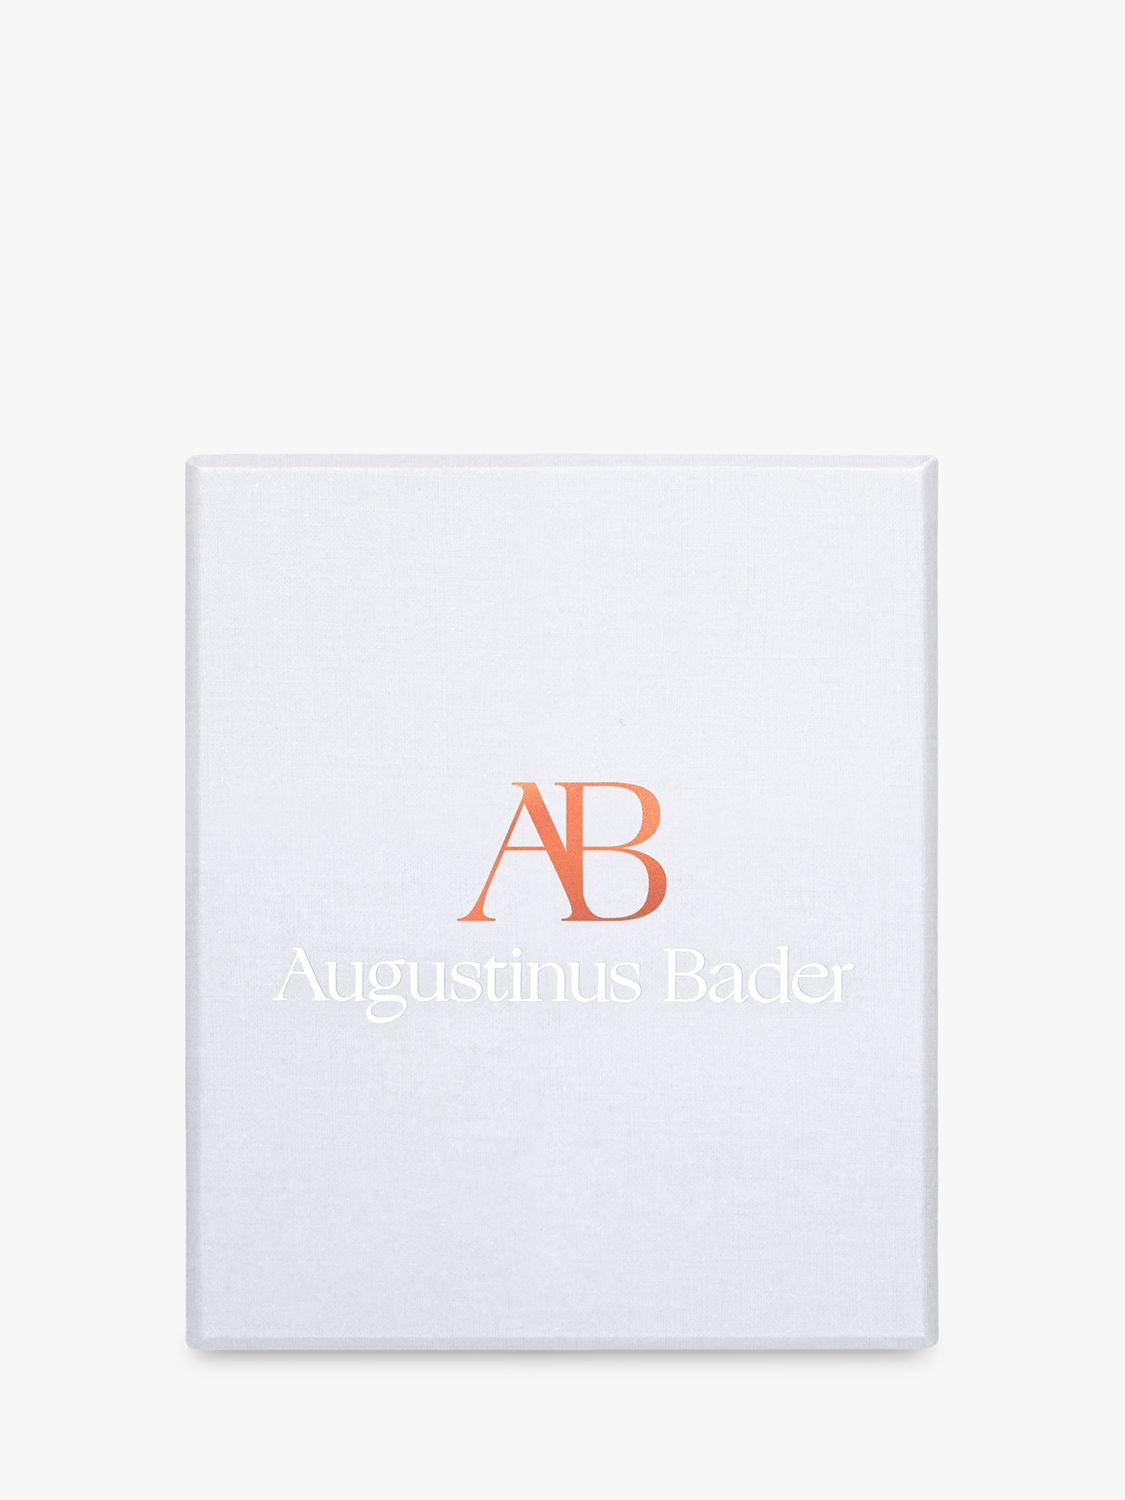 Augustinus Bader Discovery Duo Skincare Gift Set, 2 x 15ml 4